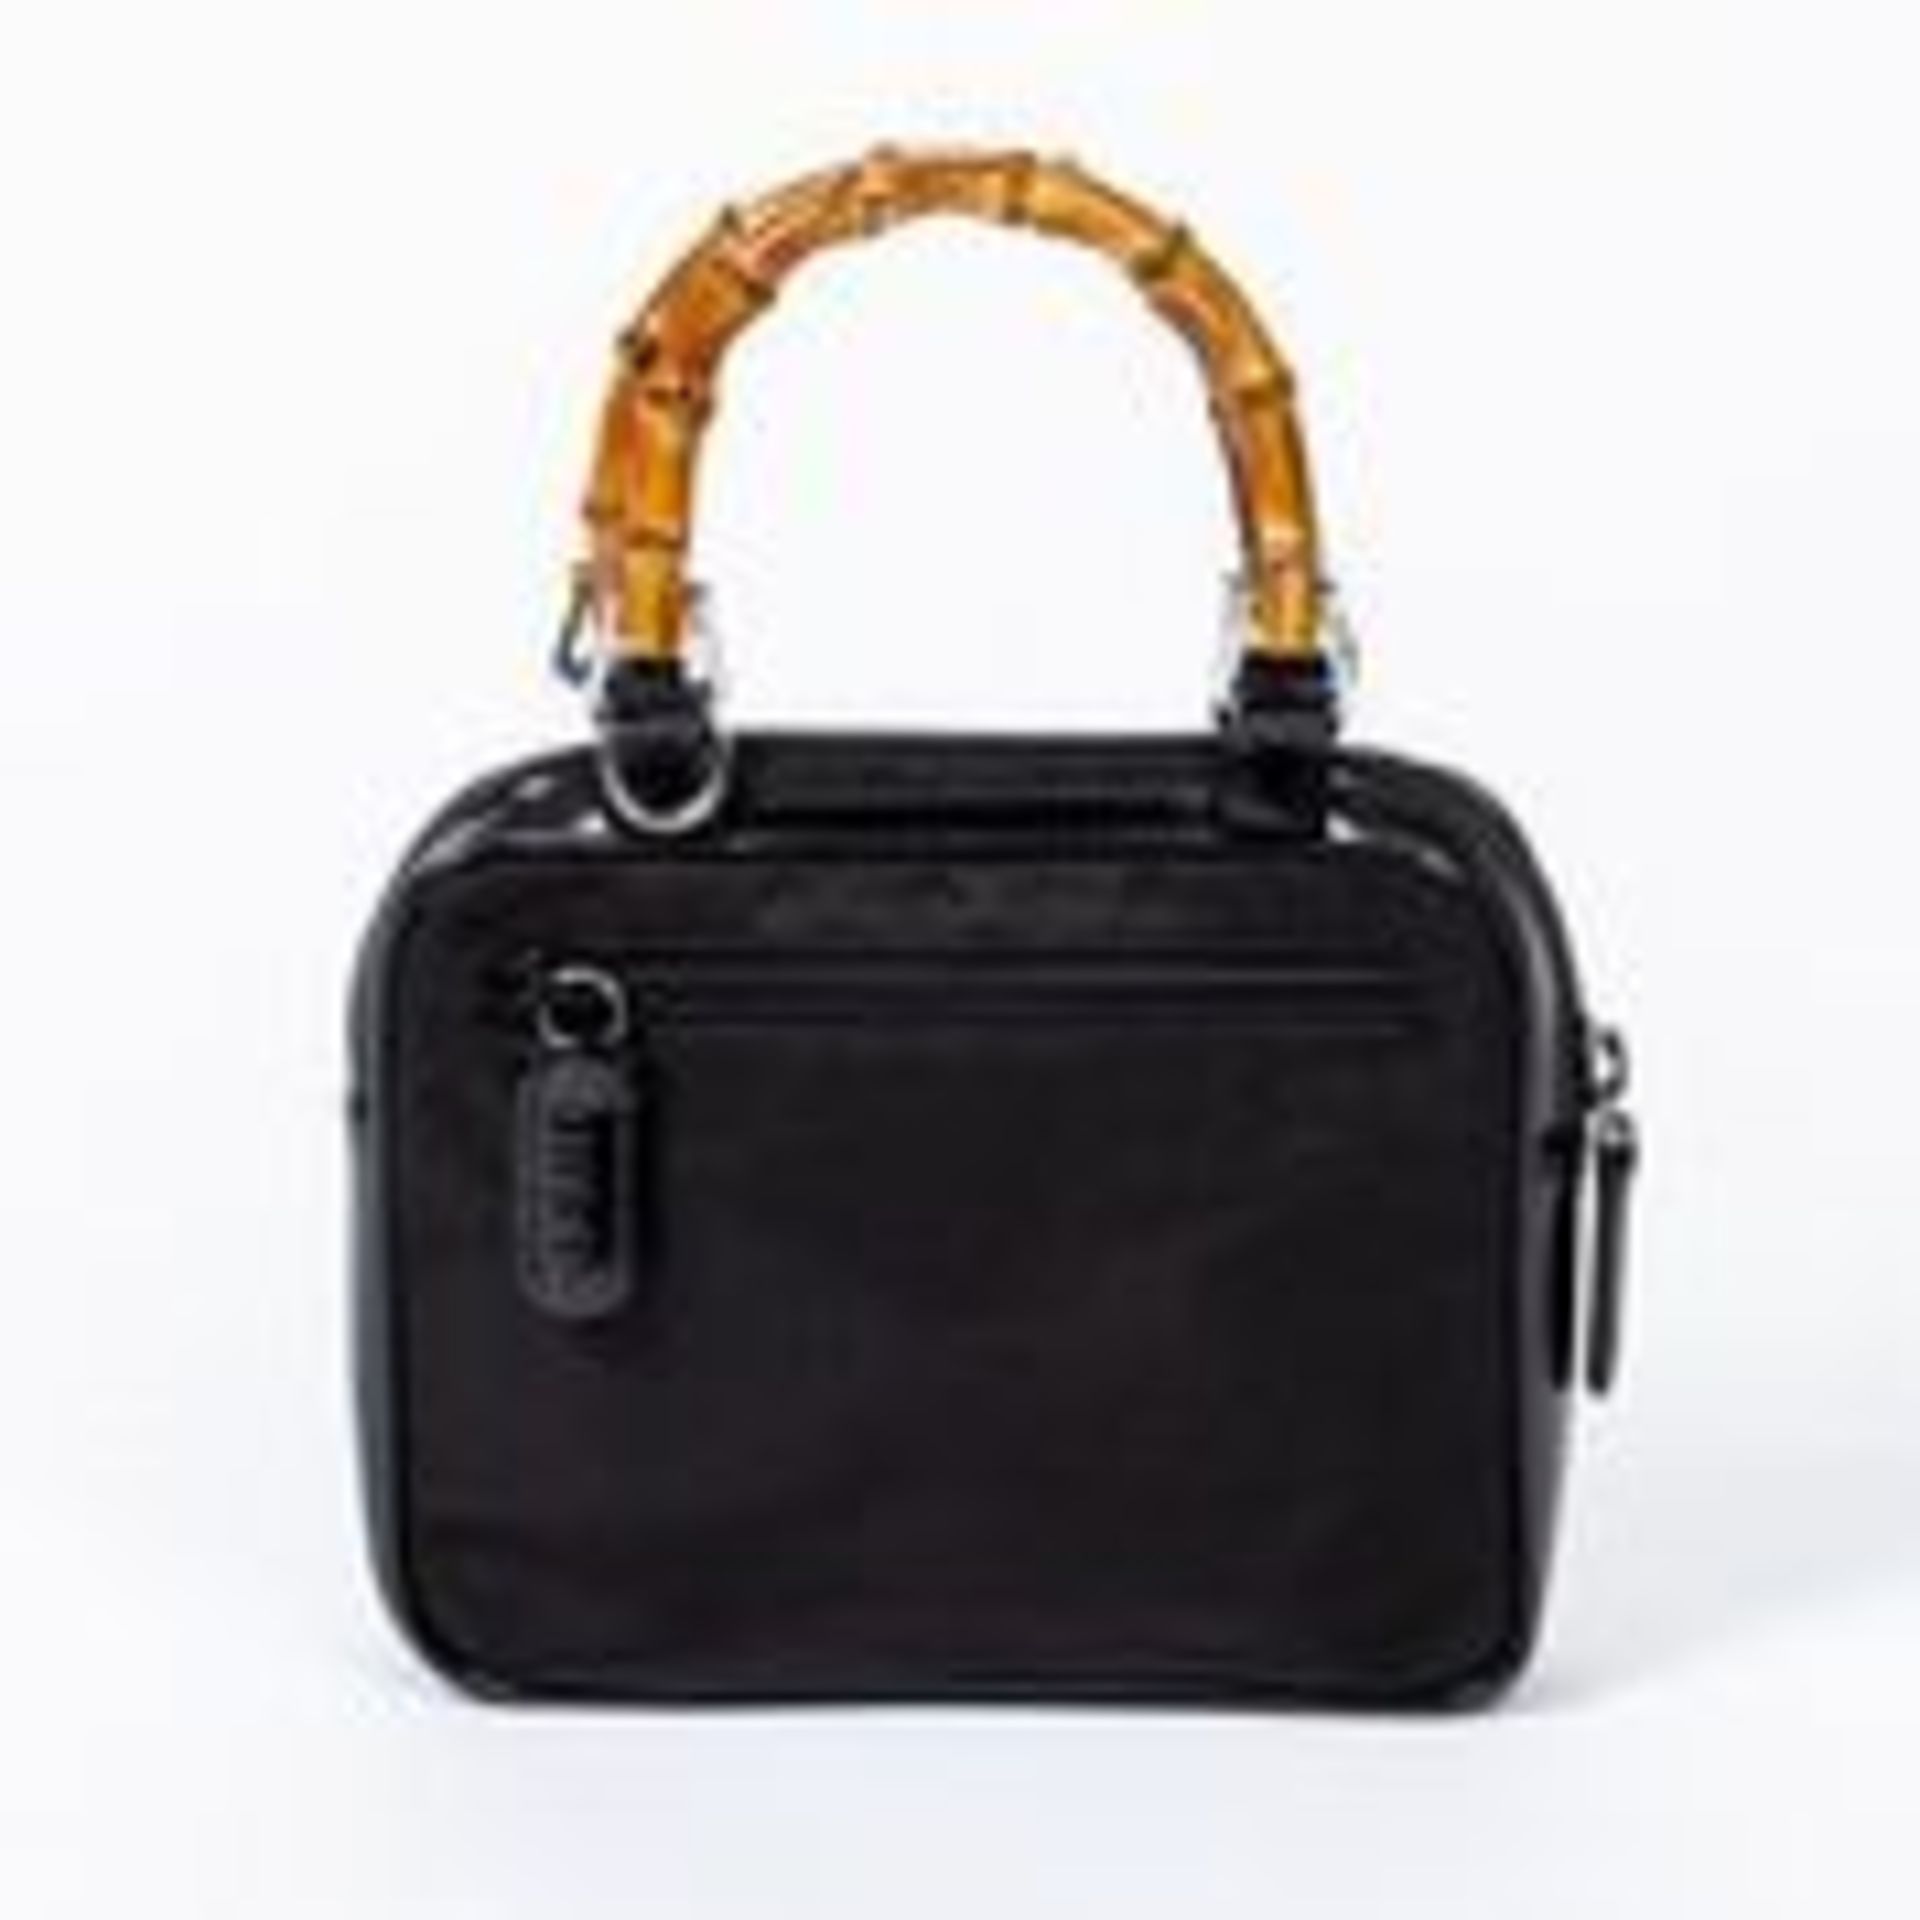 RRP £780 Vintage Mini Bamboo Tote Handbag Black - AAP0148 - Grade A - Please Contact Us Directly For - Image 2 of 4